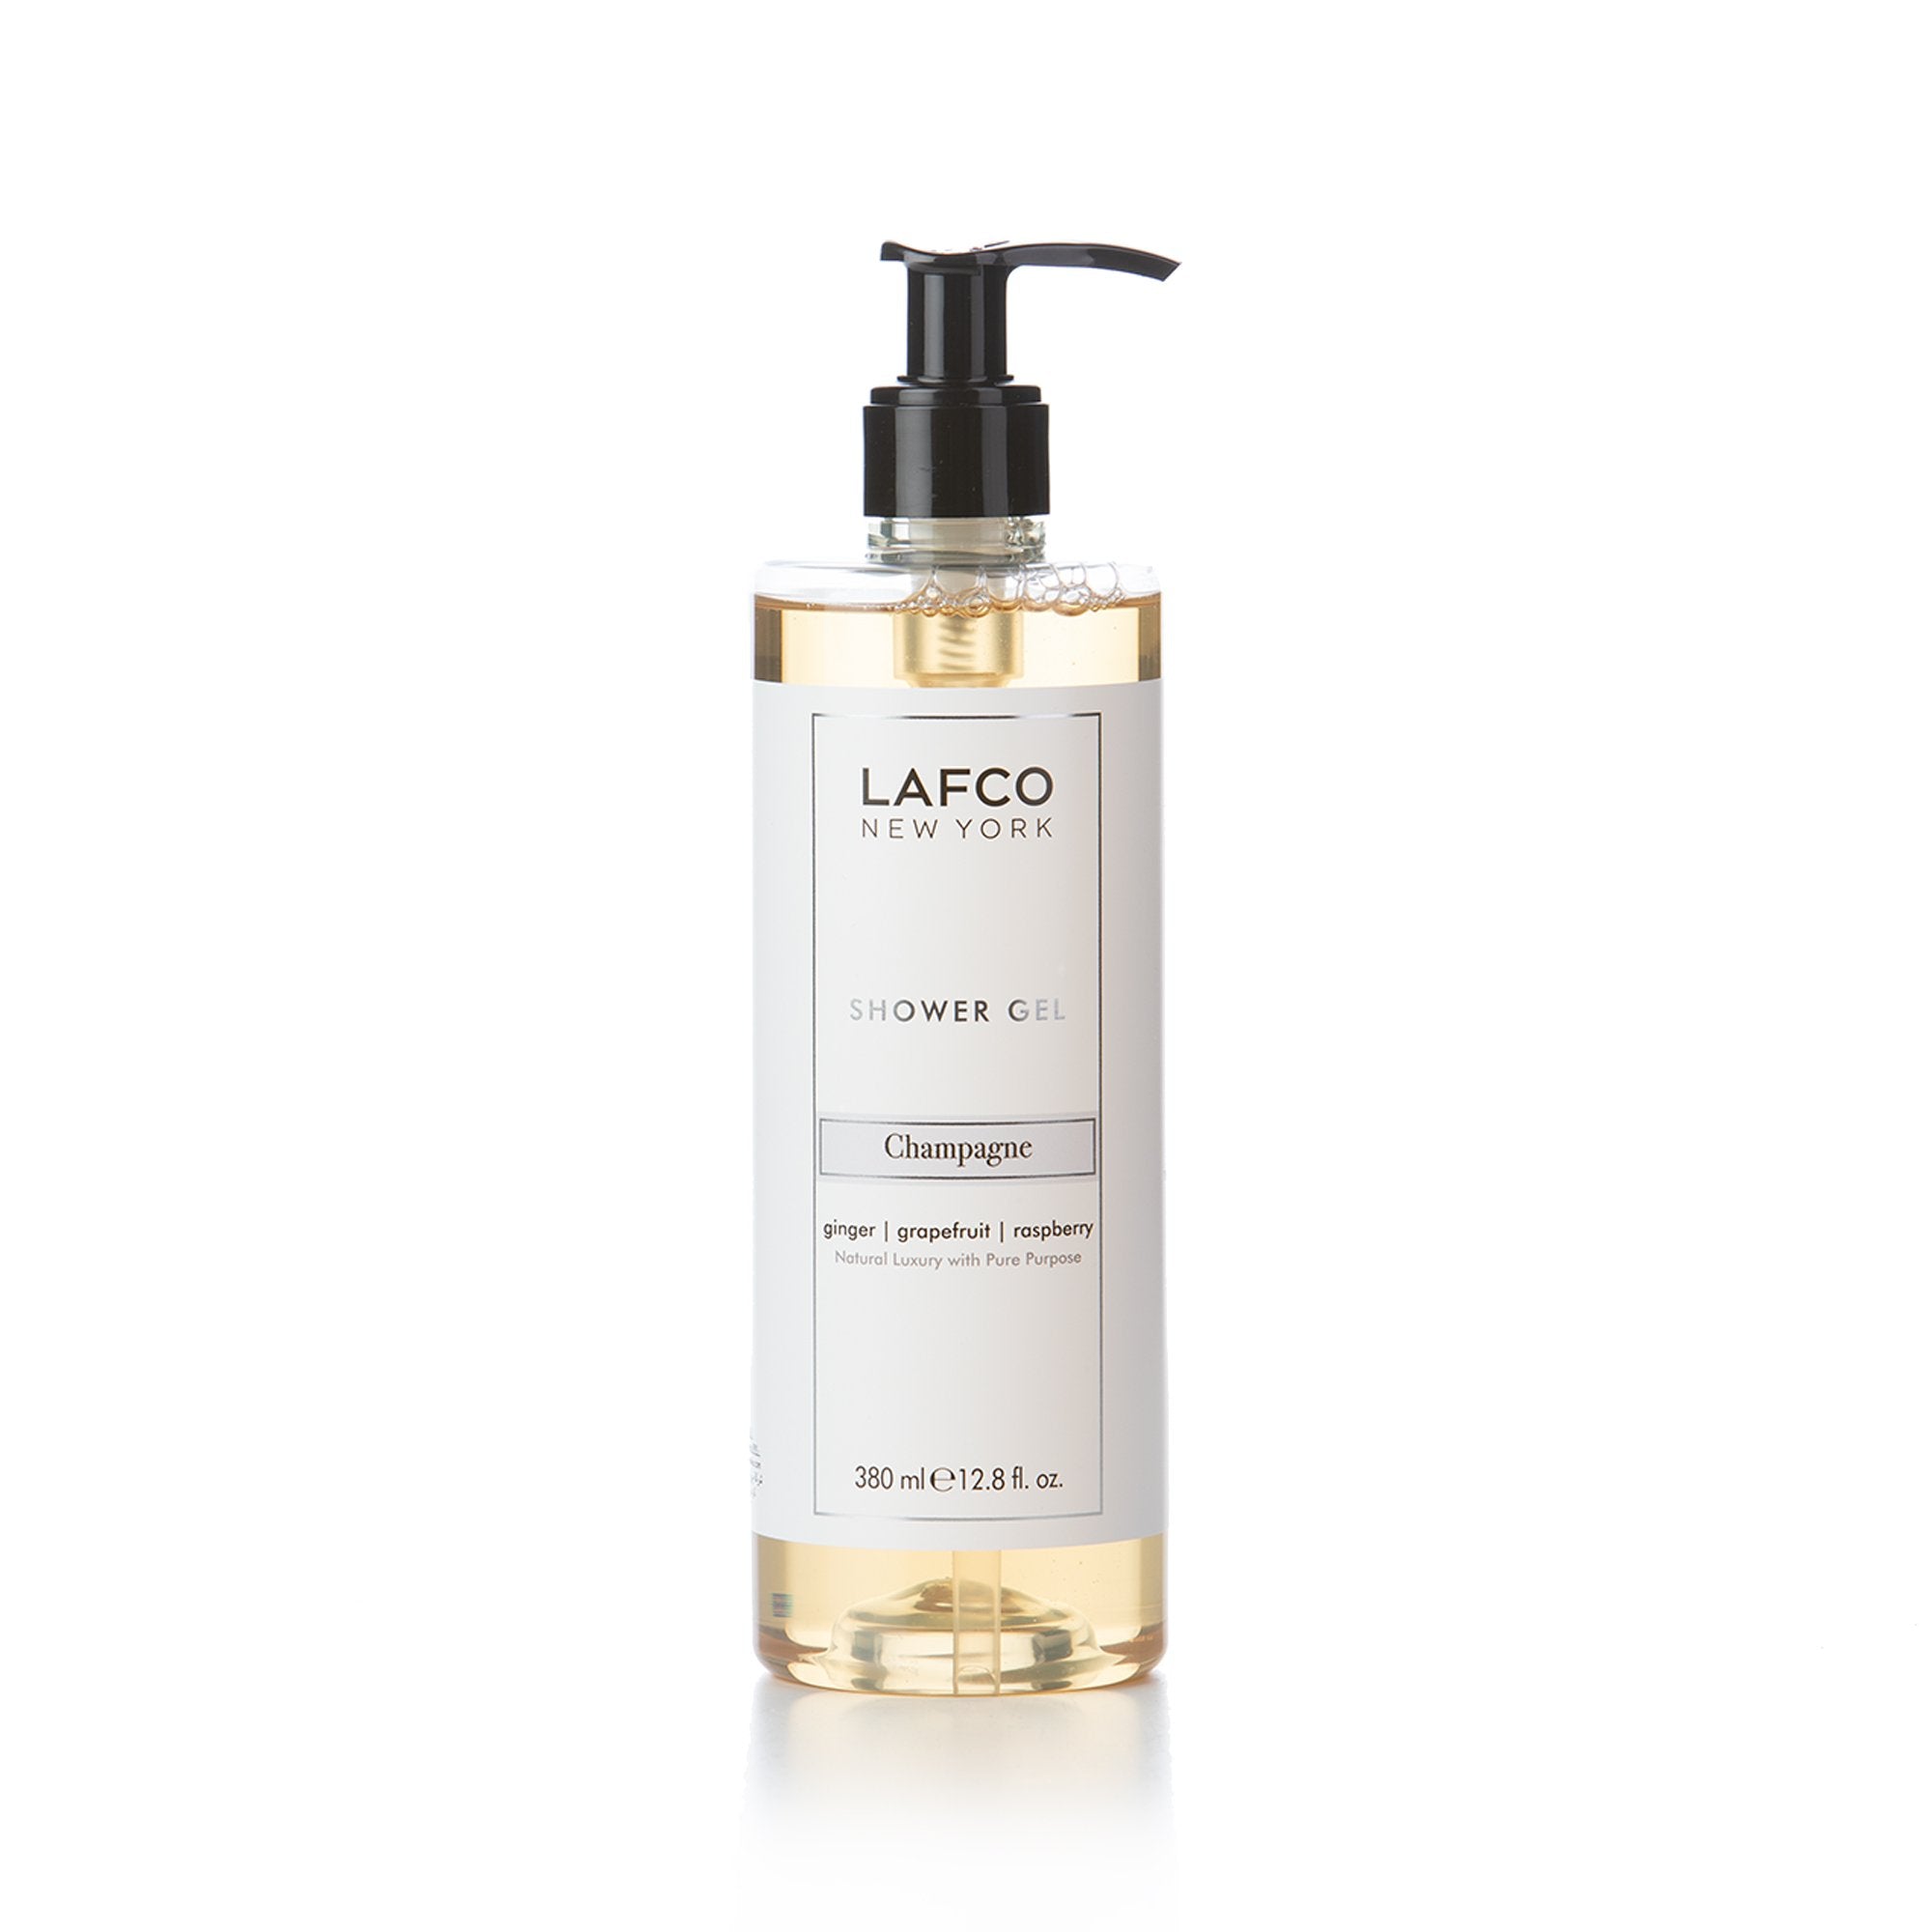 Lafco "Champagne" Shower Gel With Locked Pump (380 ml) 